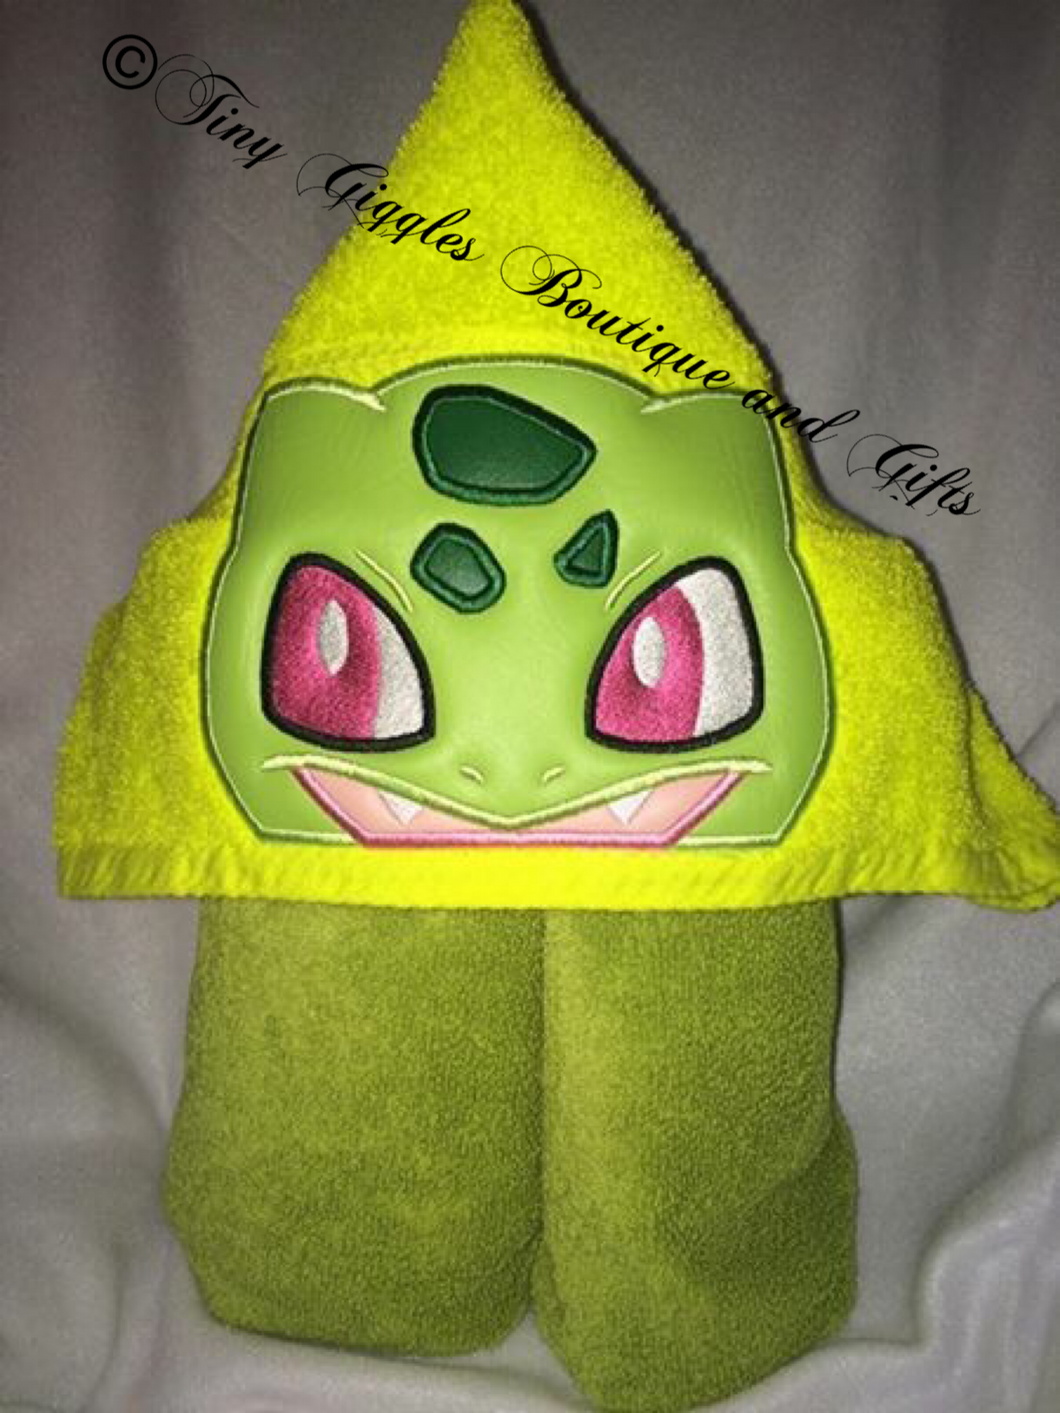 Dino Character Hooded Towel